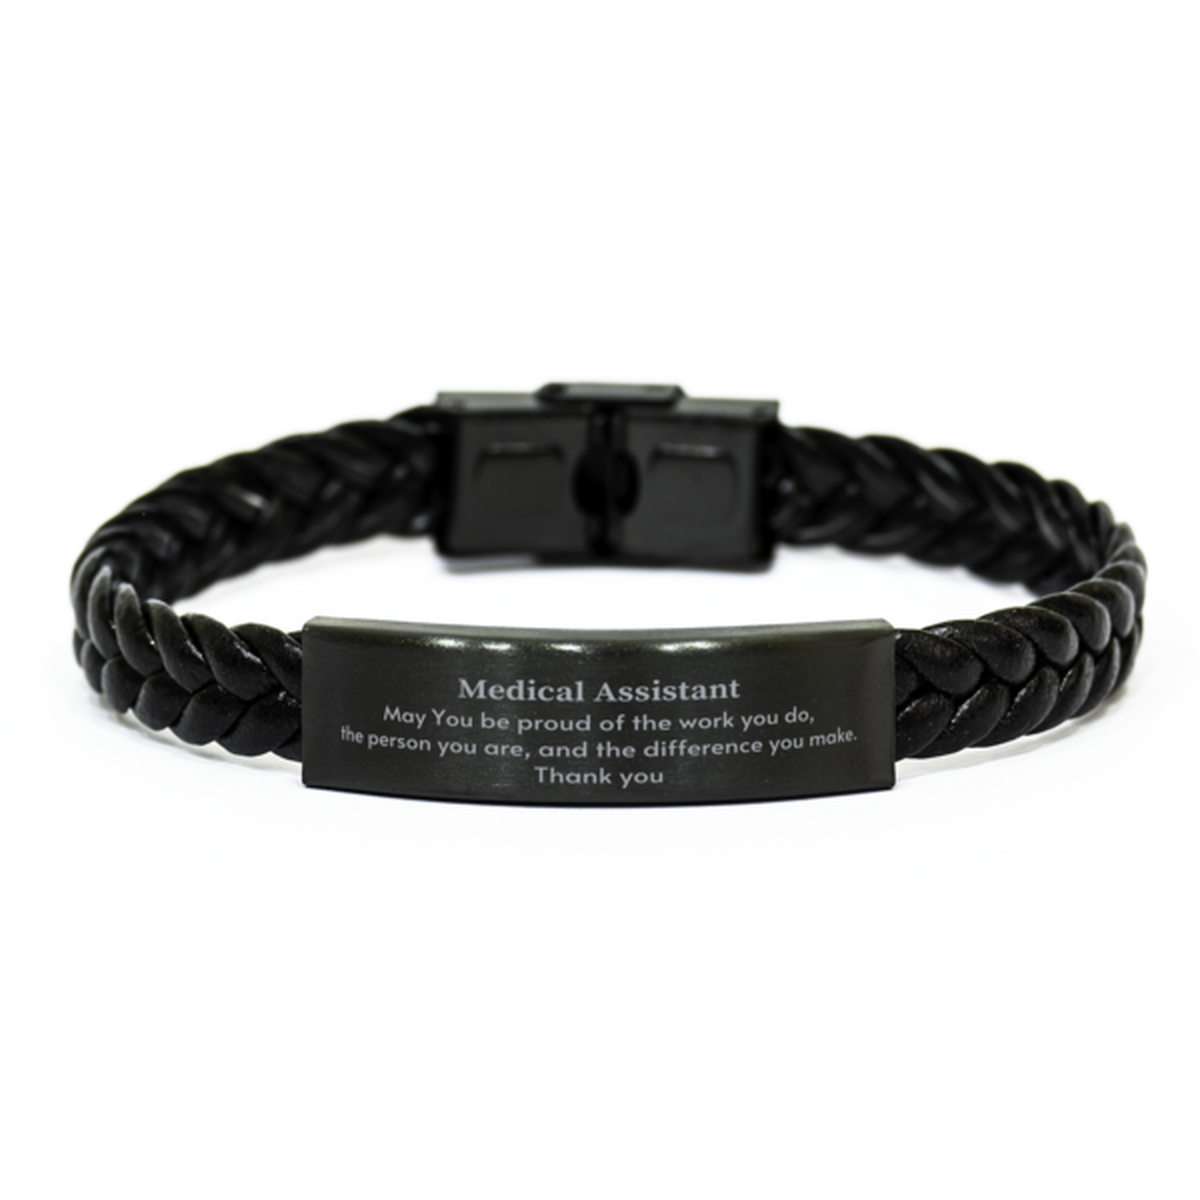 Heartwarming Braided Leather Bracelet Retirement Coworkers Gifts for Medical Assistant, Medical Assistant May You be proud of the work you do, the person you are Gifts for Boss Men Women Friends